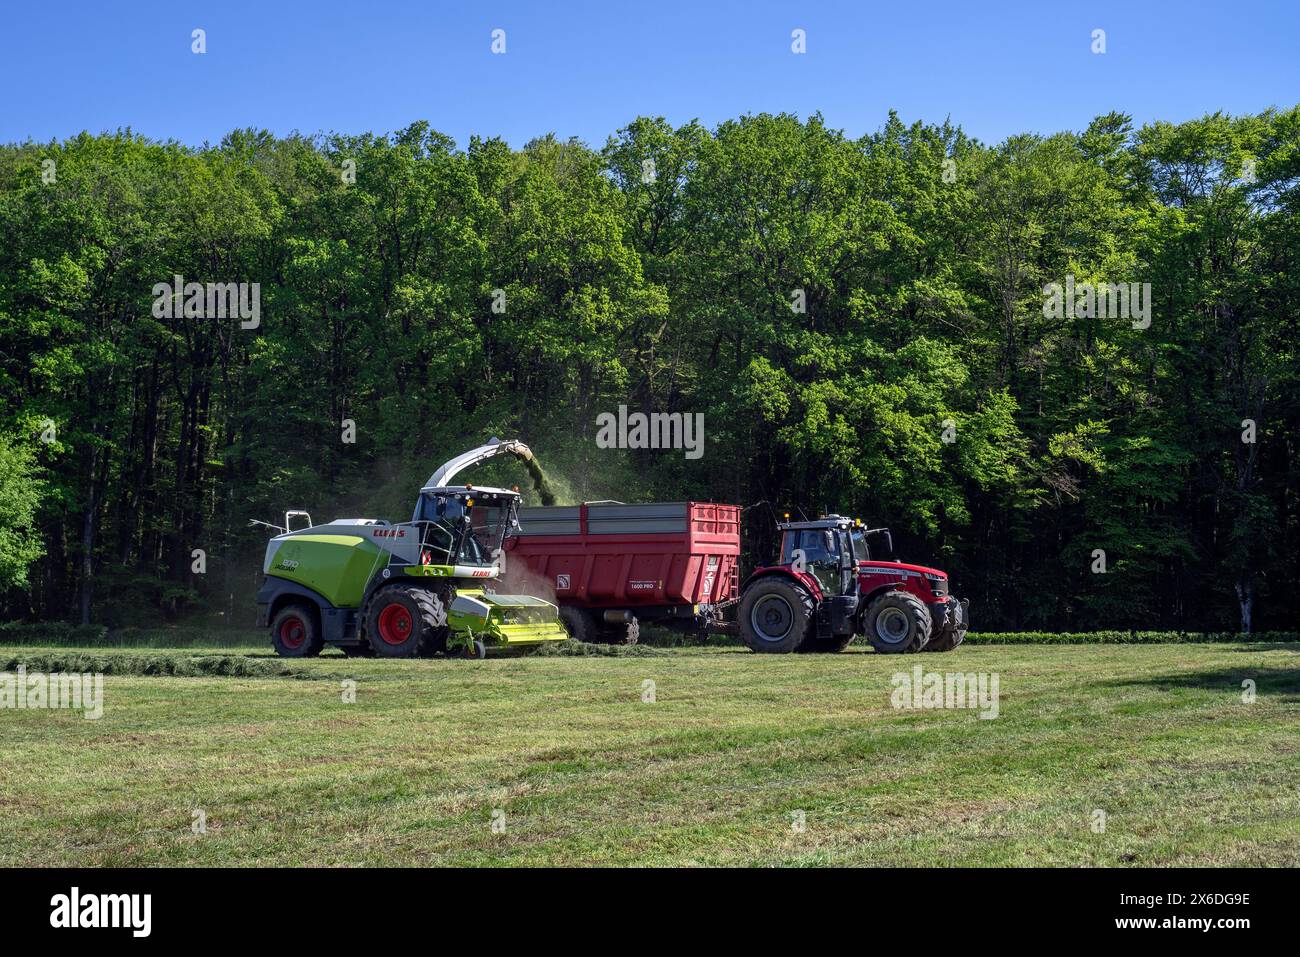 Tractor with trailer running beside Claas Jaguar 870 forage harvester / self-propelled silage chopper harvesting grass from meadow / pasture Stock Photo